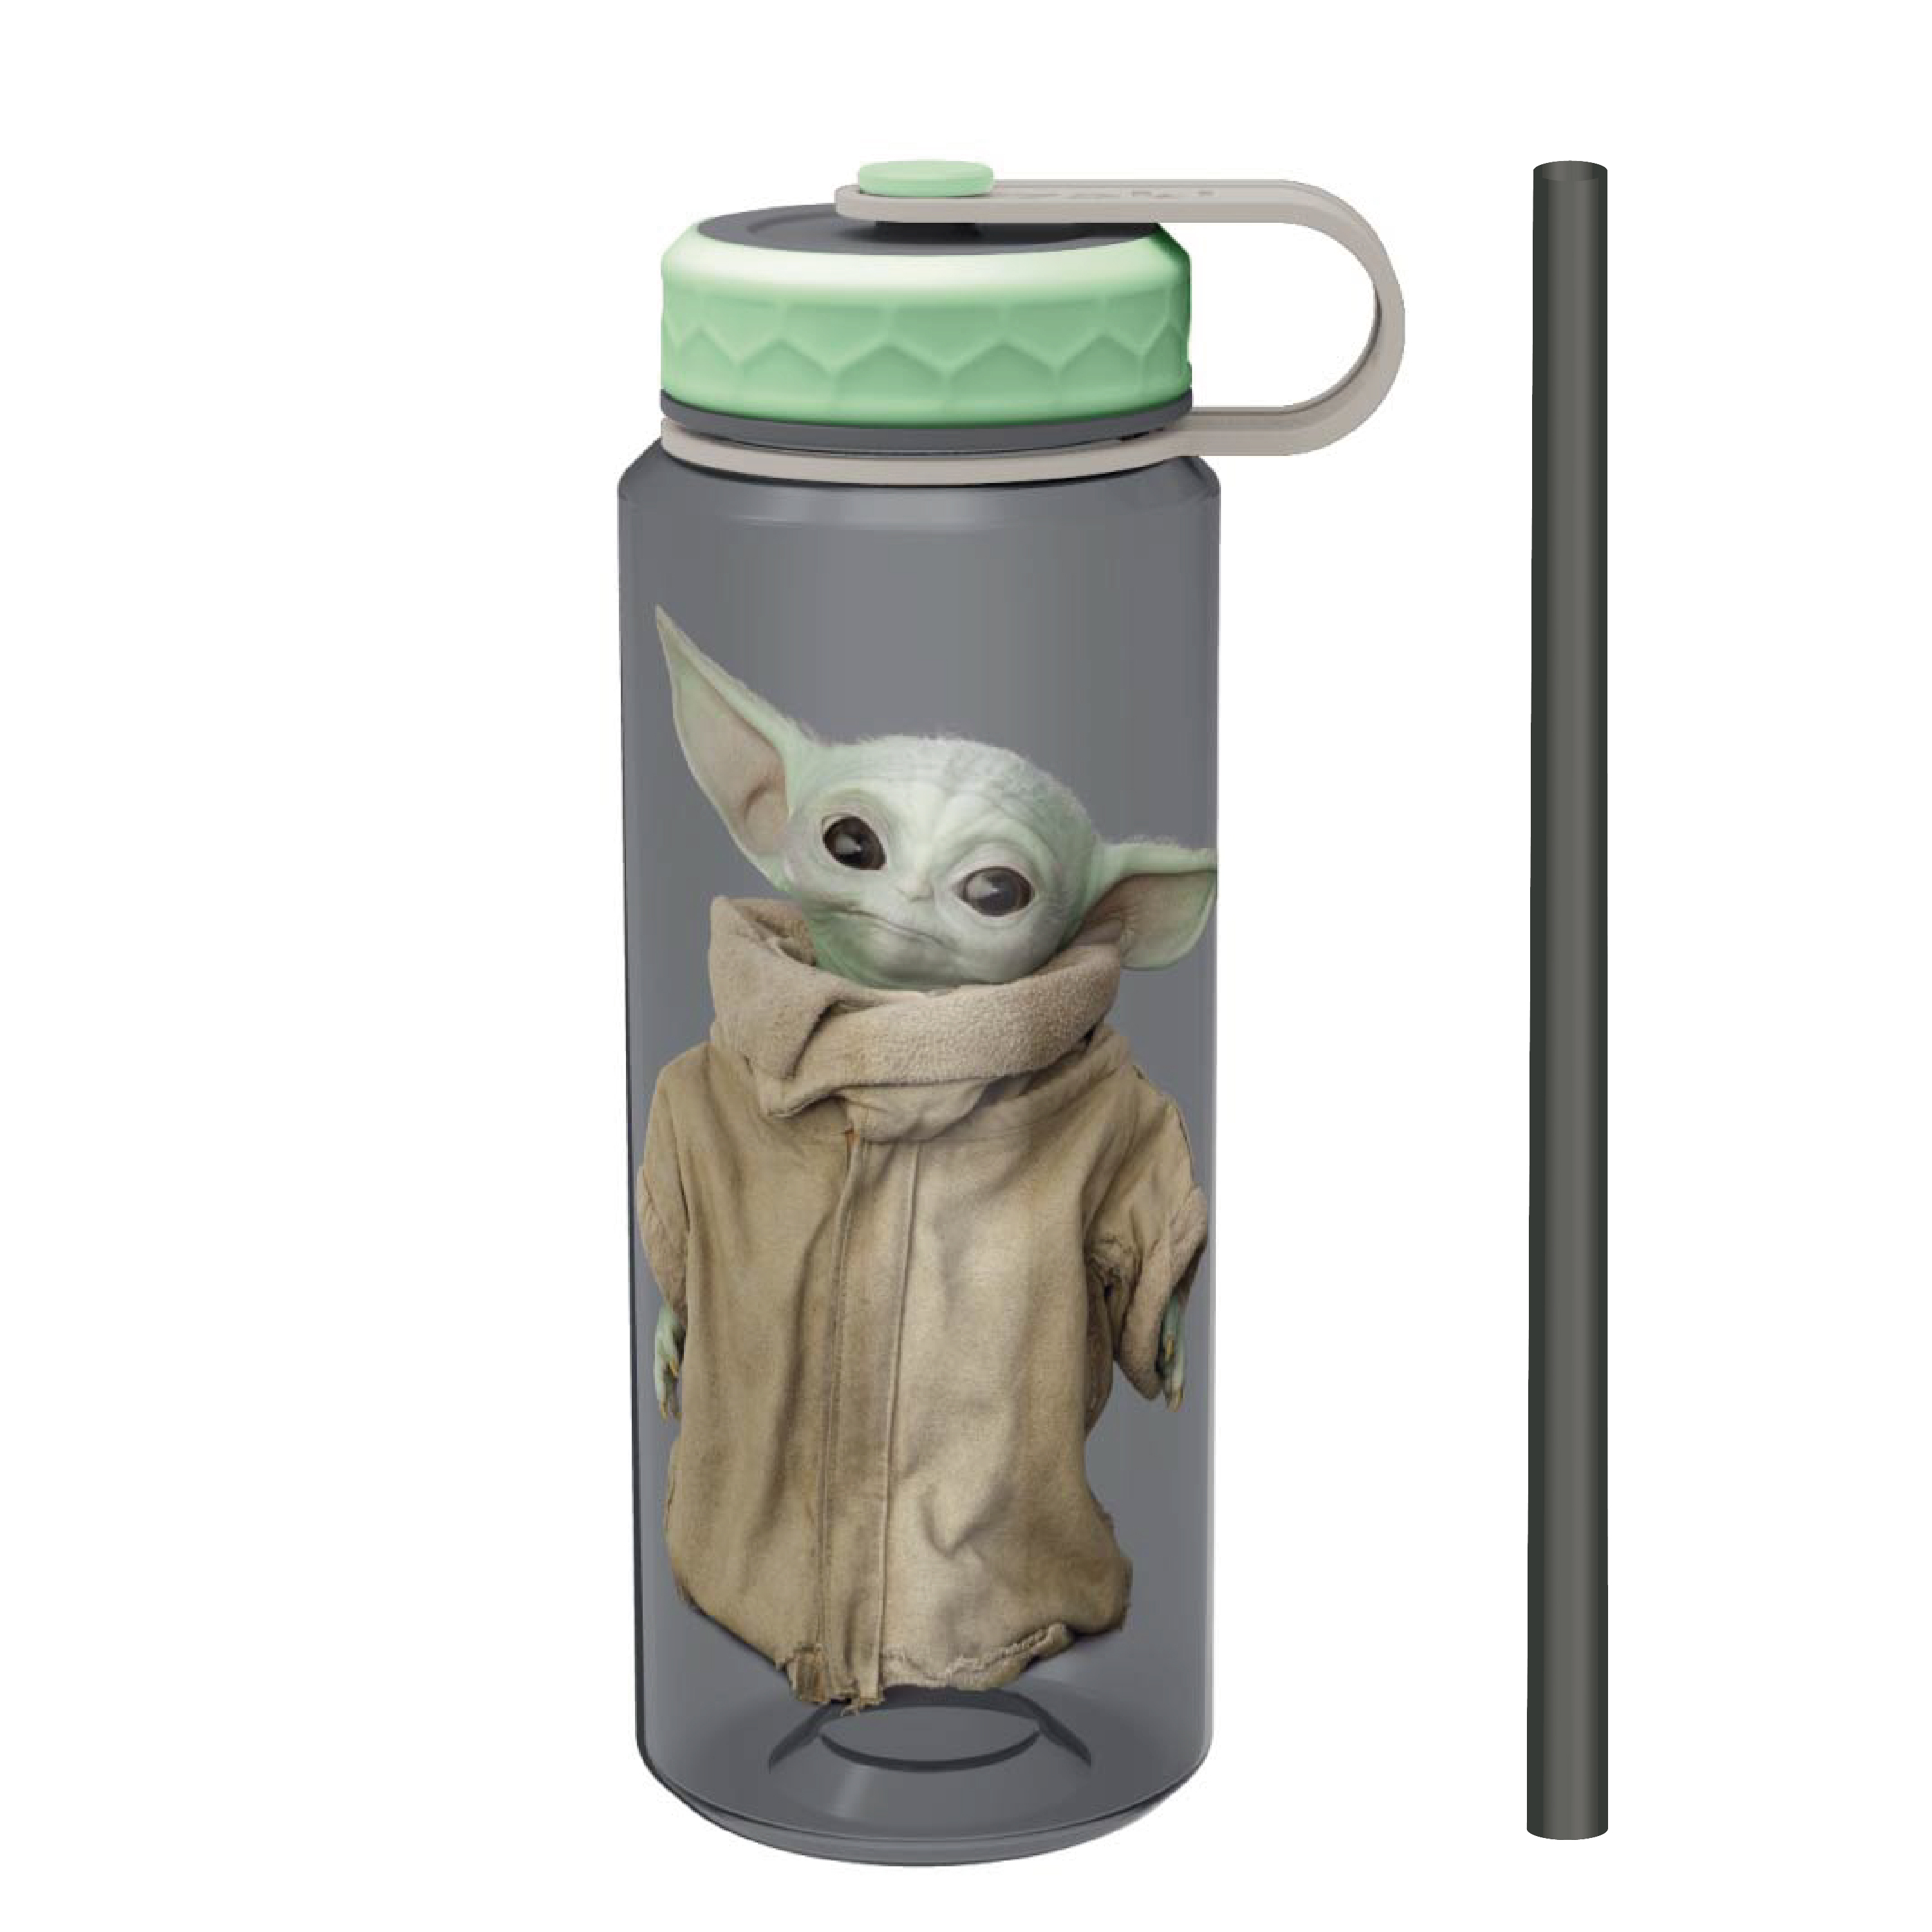 Star Wars: The Mandalorian 36 ounce Reusable Plastic Water Bottle, The Child (Baby Yoda) slideshow image 1